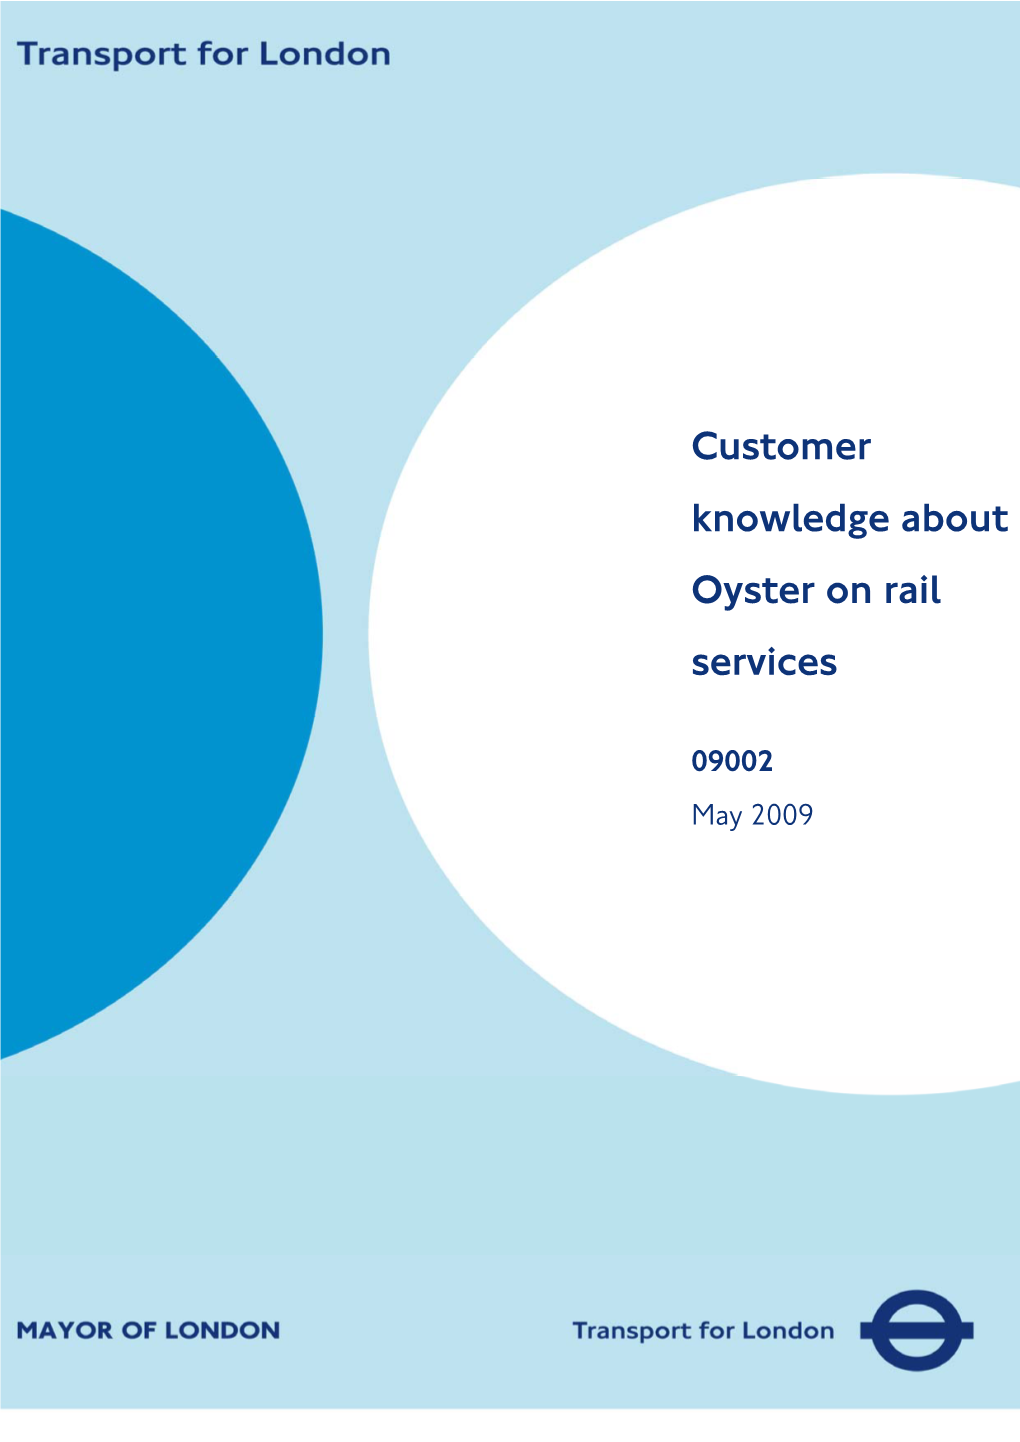 Customer Knowledge About Oyster on Rail Services